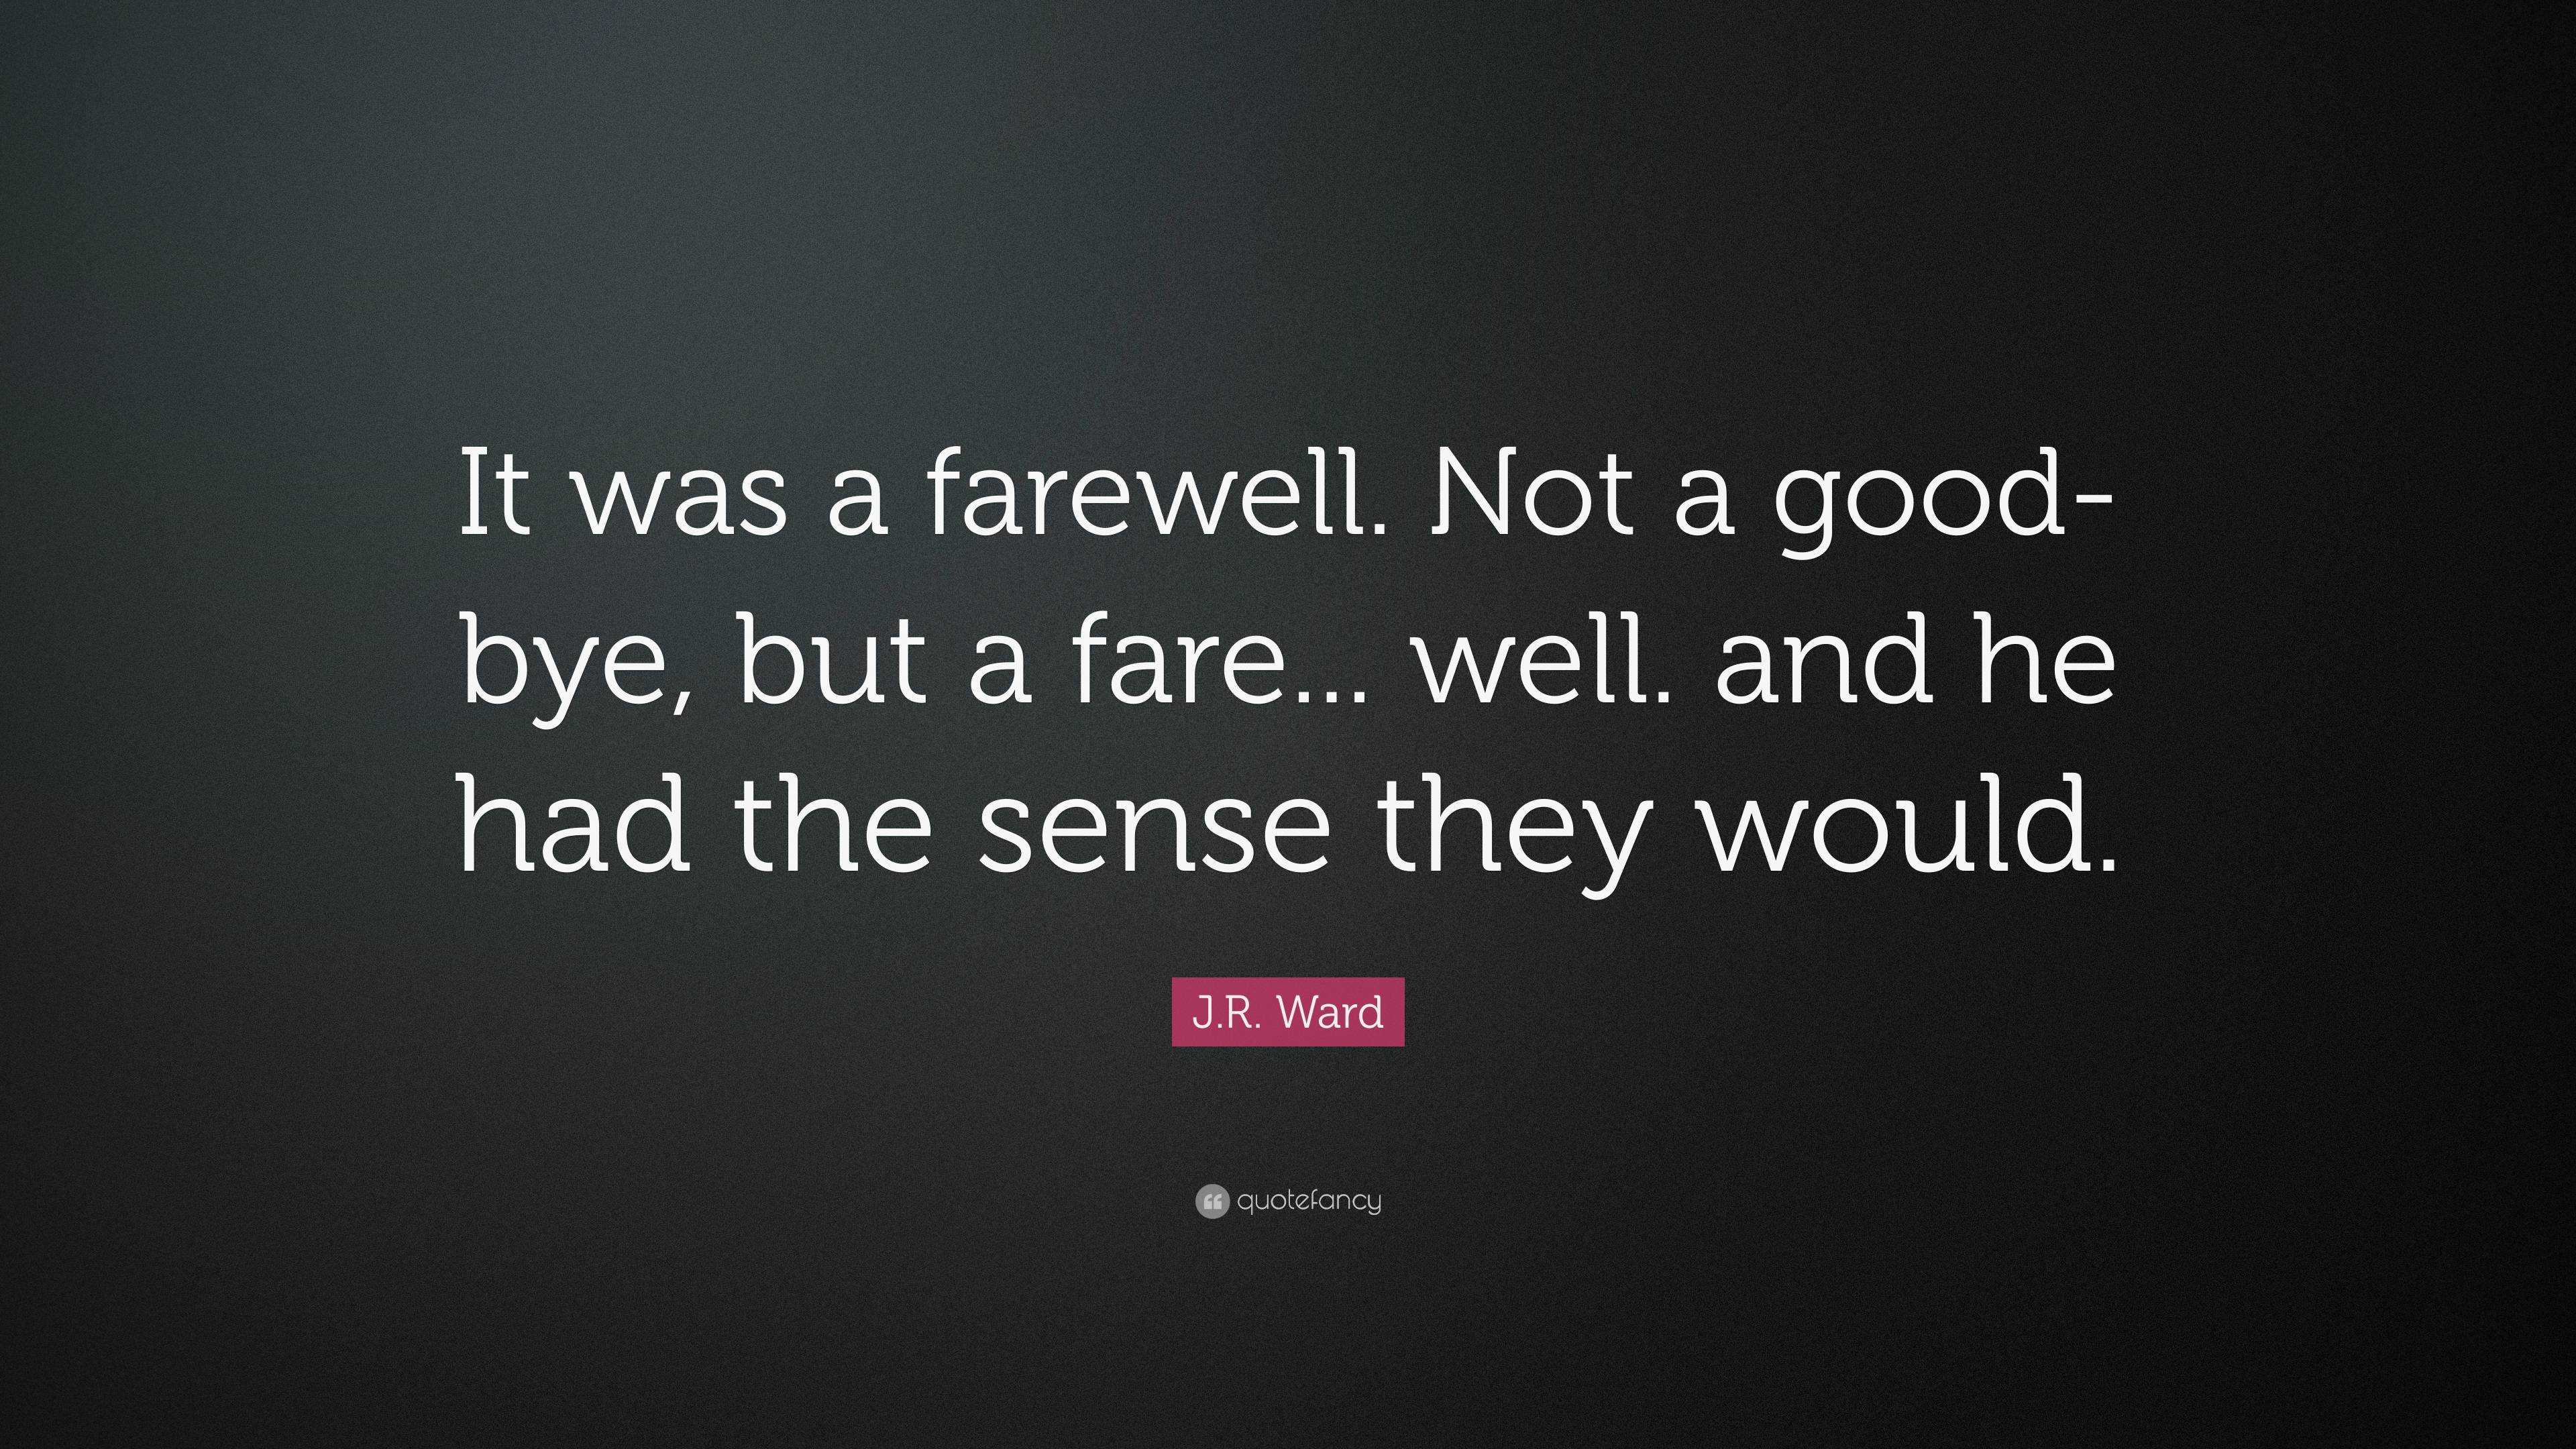 J.R. Ward Quote: “It was a farewell. Not a good-bye, but a fare... well ...